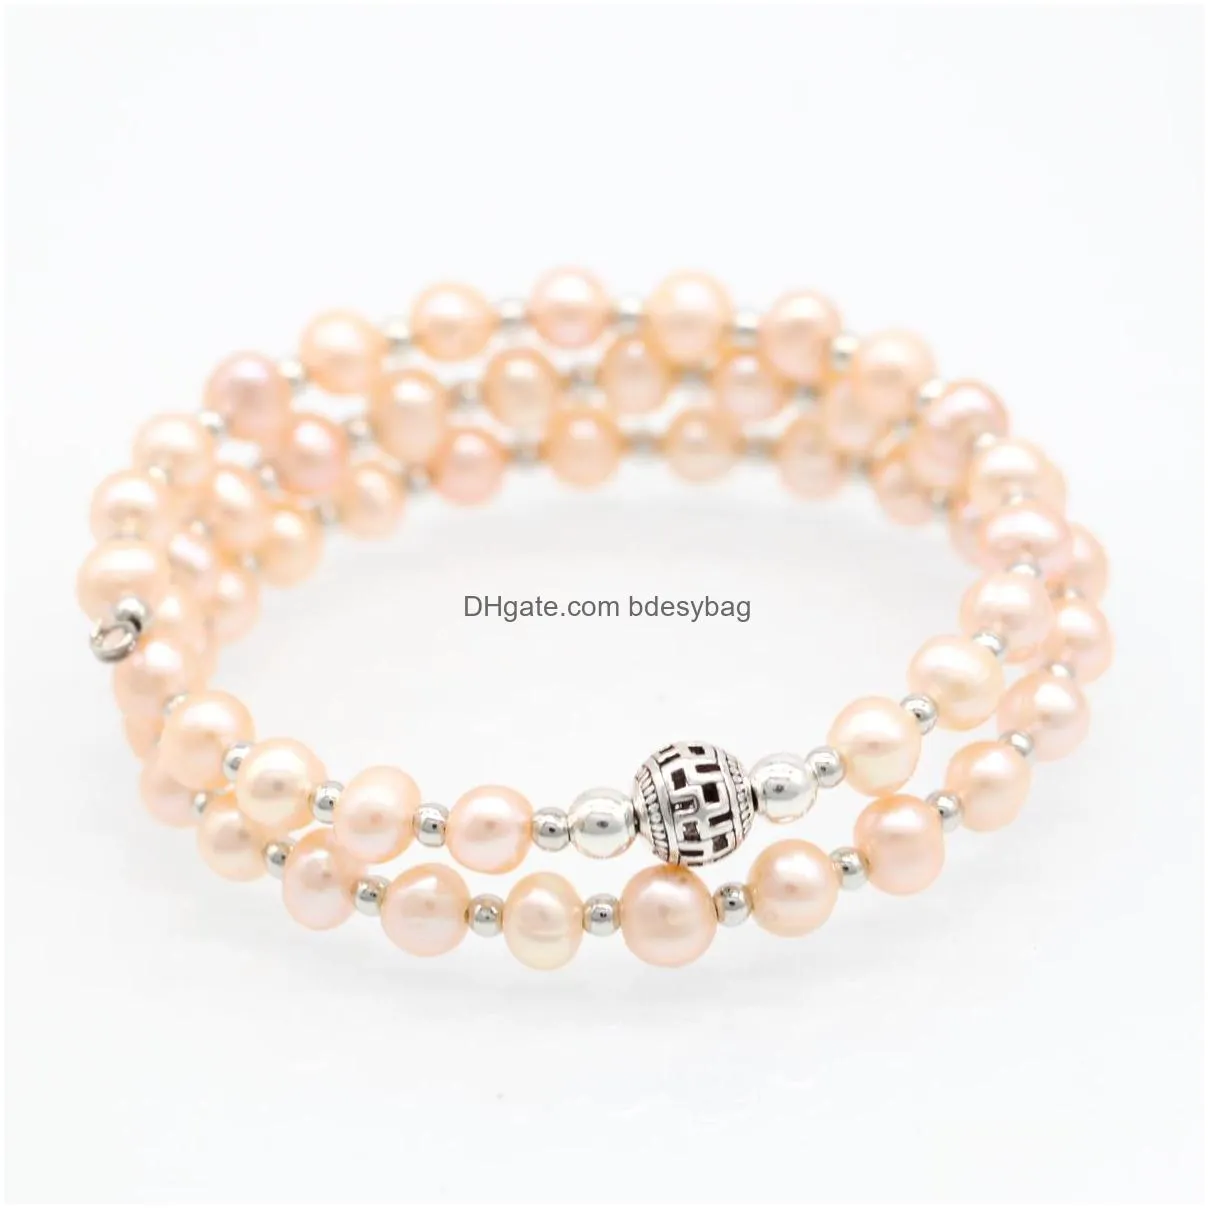 freshwater layer pearl wrap bracelet love wish nearly round dyed color pearl bead bangles adjustable jewelry for women